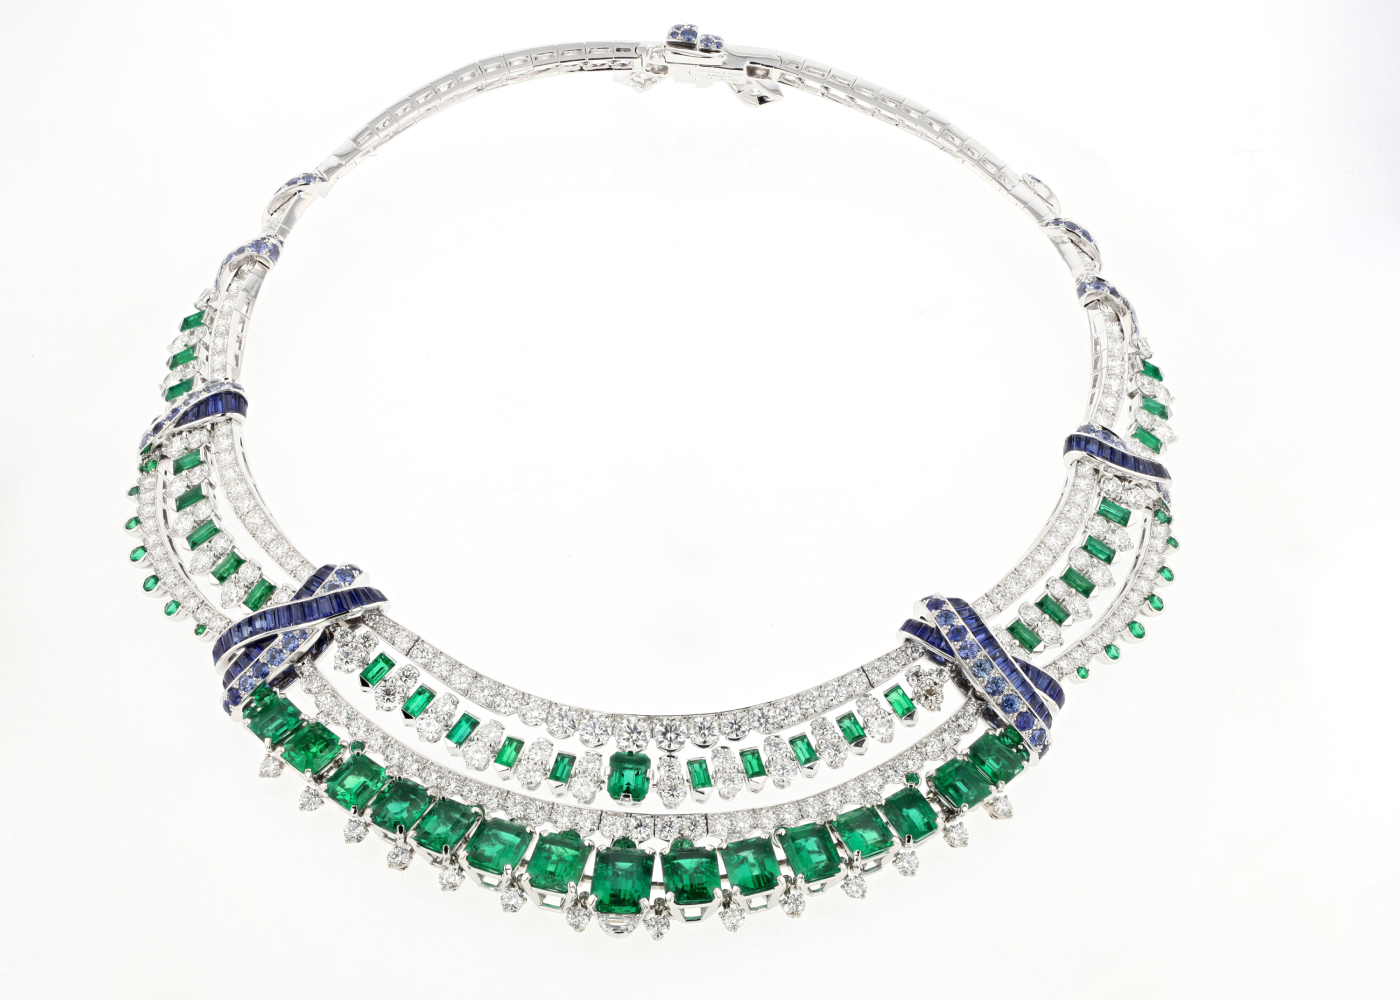 The Quatre Chemins necklace (2019) showcases white gold, platinum, sapphires, and 16 emerald-cut Zambian emeralds (27.79 carats). The necklace is inspired by the fairy tale “Town Musicians of Bremen,” collected and popularised by the German folklorists Brothers Grimm. In the story, four animals meet at a crossroads, the “Four Paths” that give this stunning necklace its name. Photo: Van Cleef & Arpels